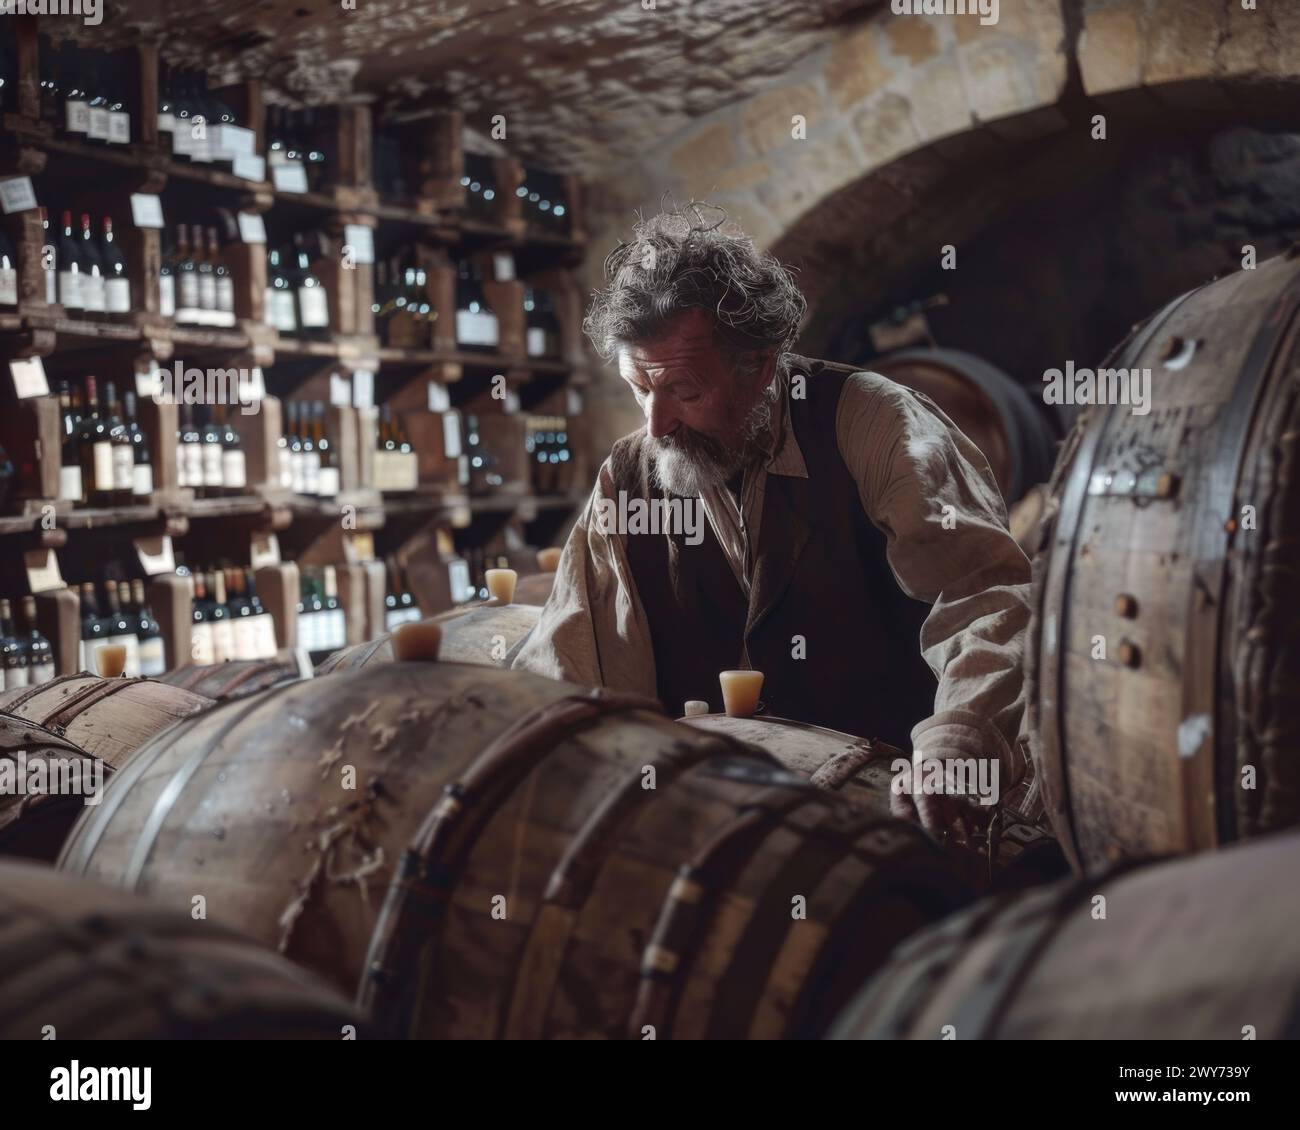 A man standing among numerous wine barrels in a cellar. Stock Photo